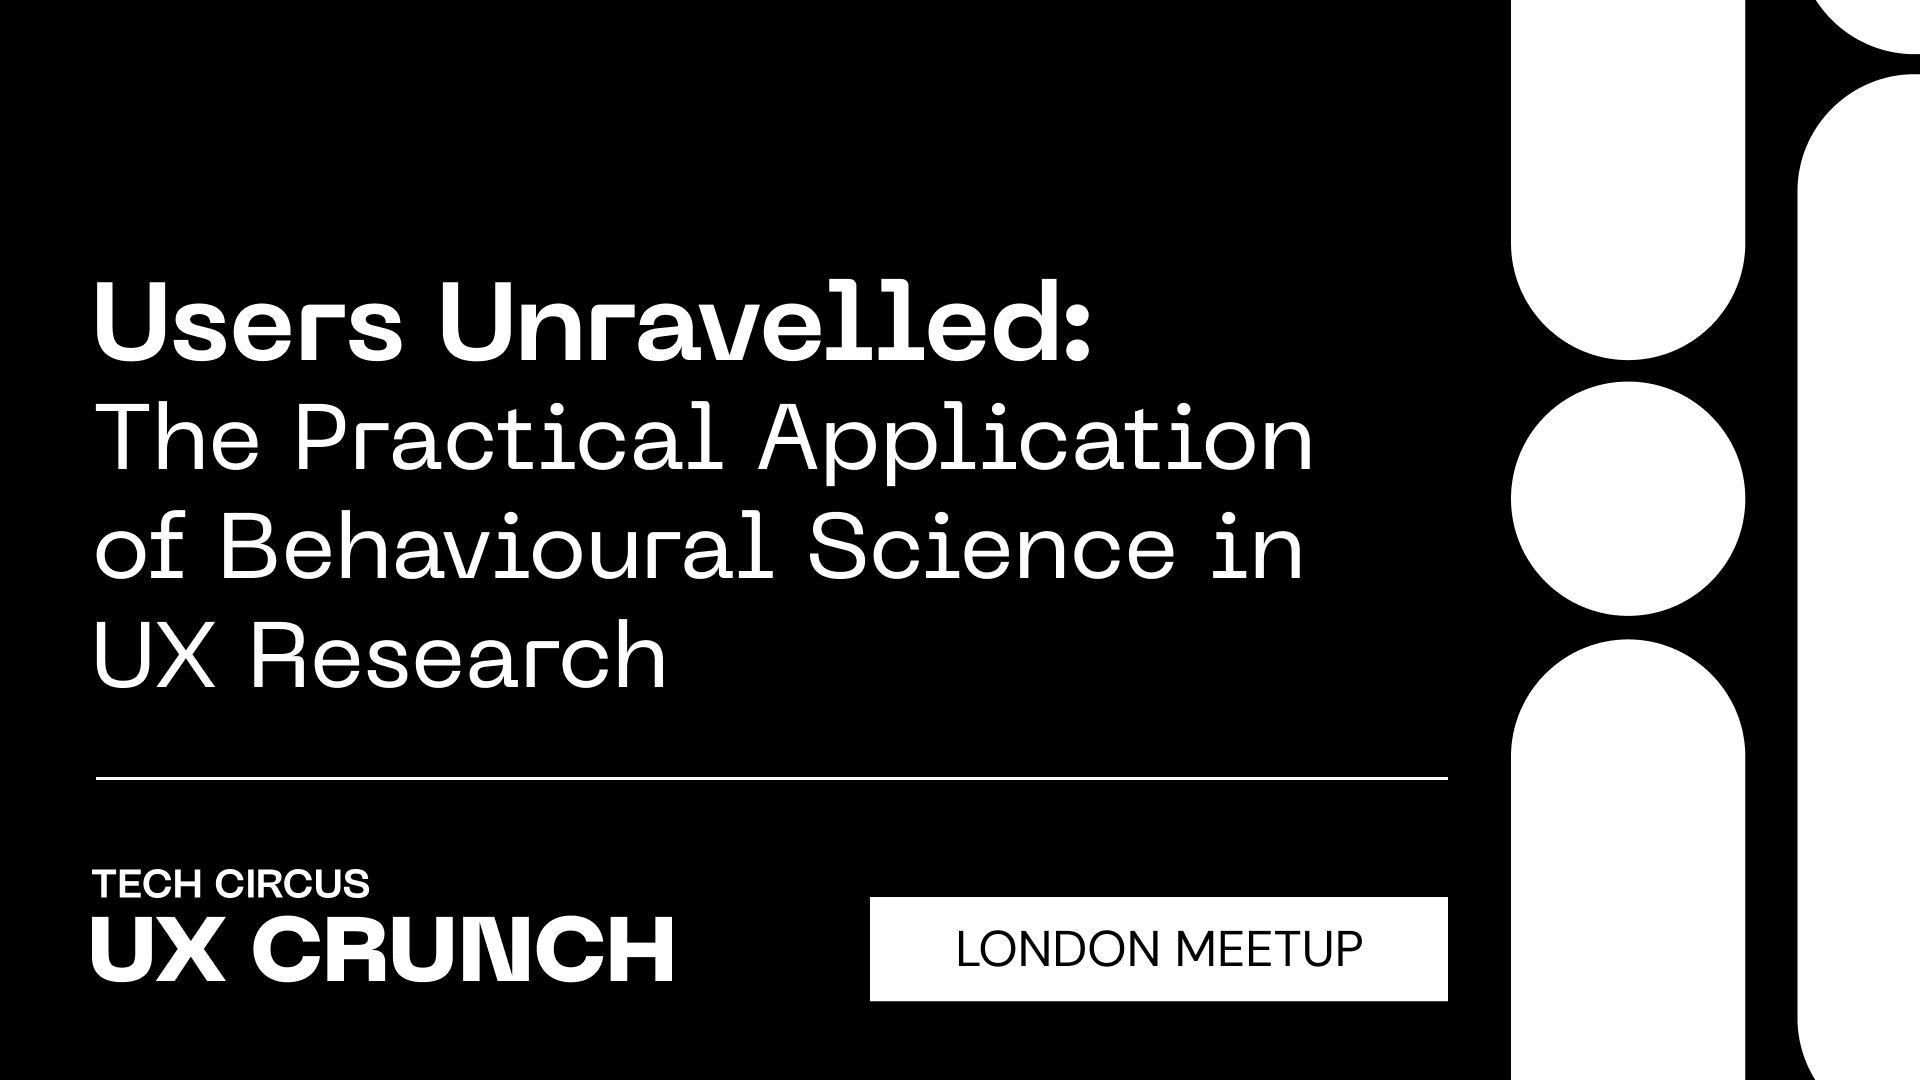 Users Unravelled: The Practical Application of Behavioural Science in UX Research